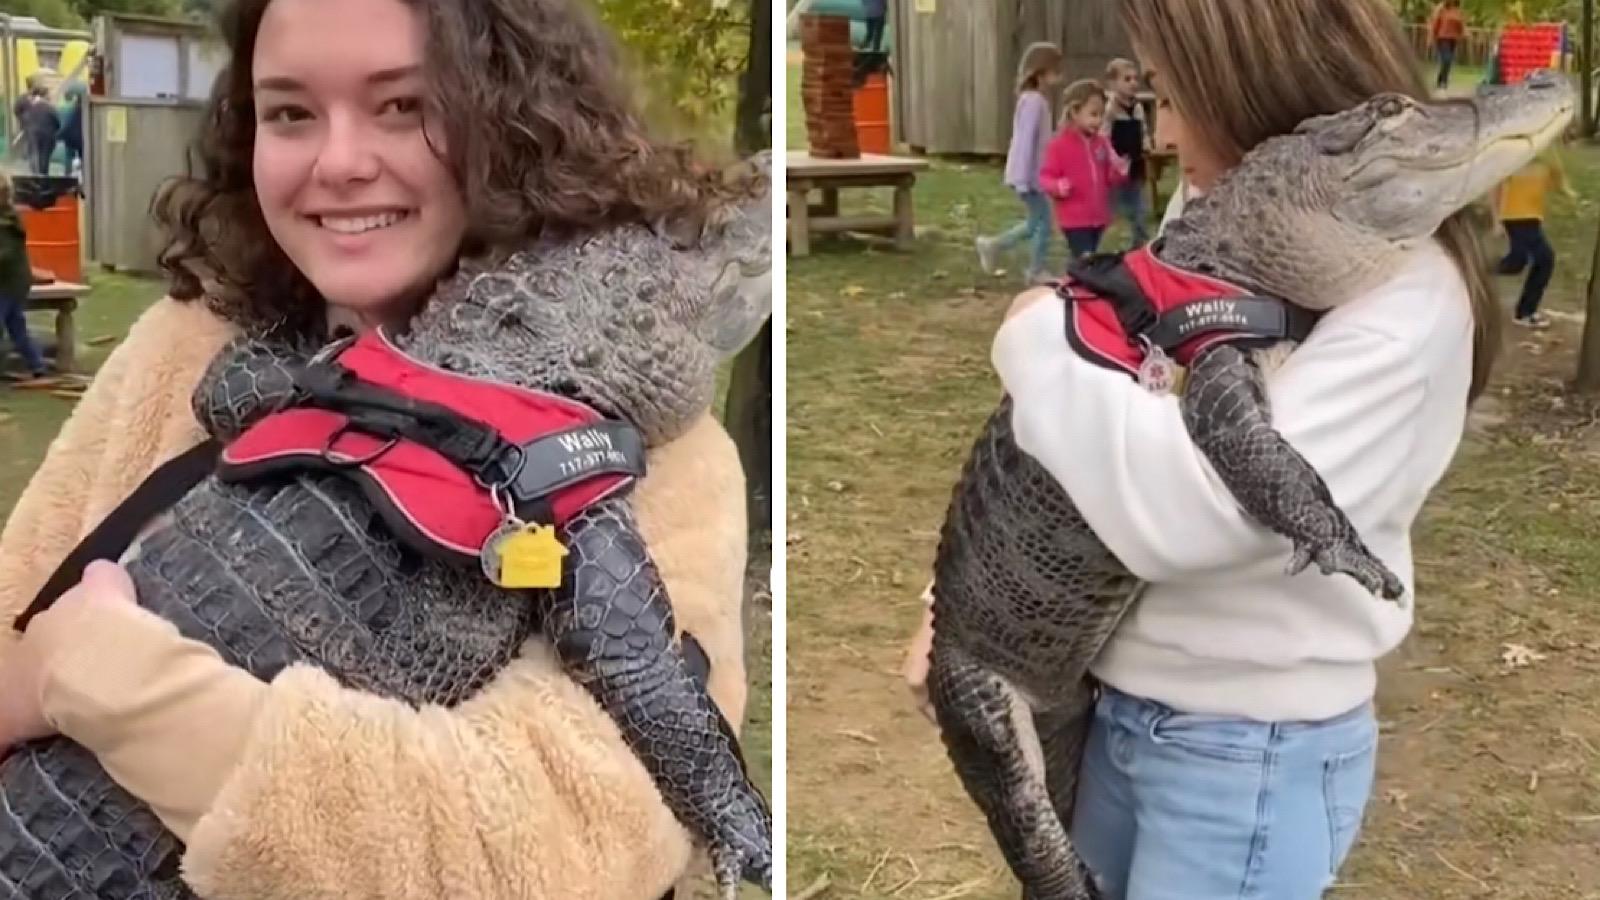 wally the emotional support alligator